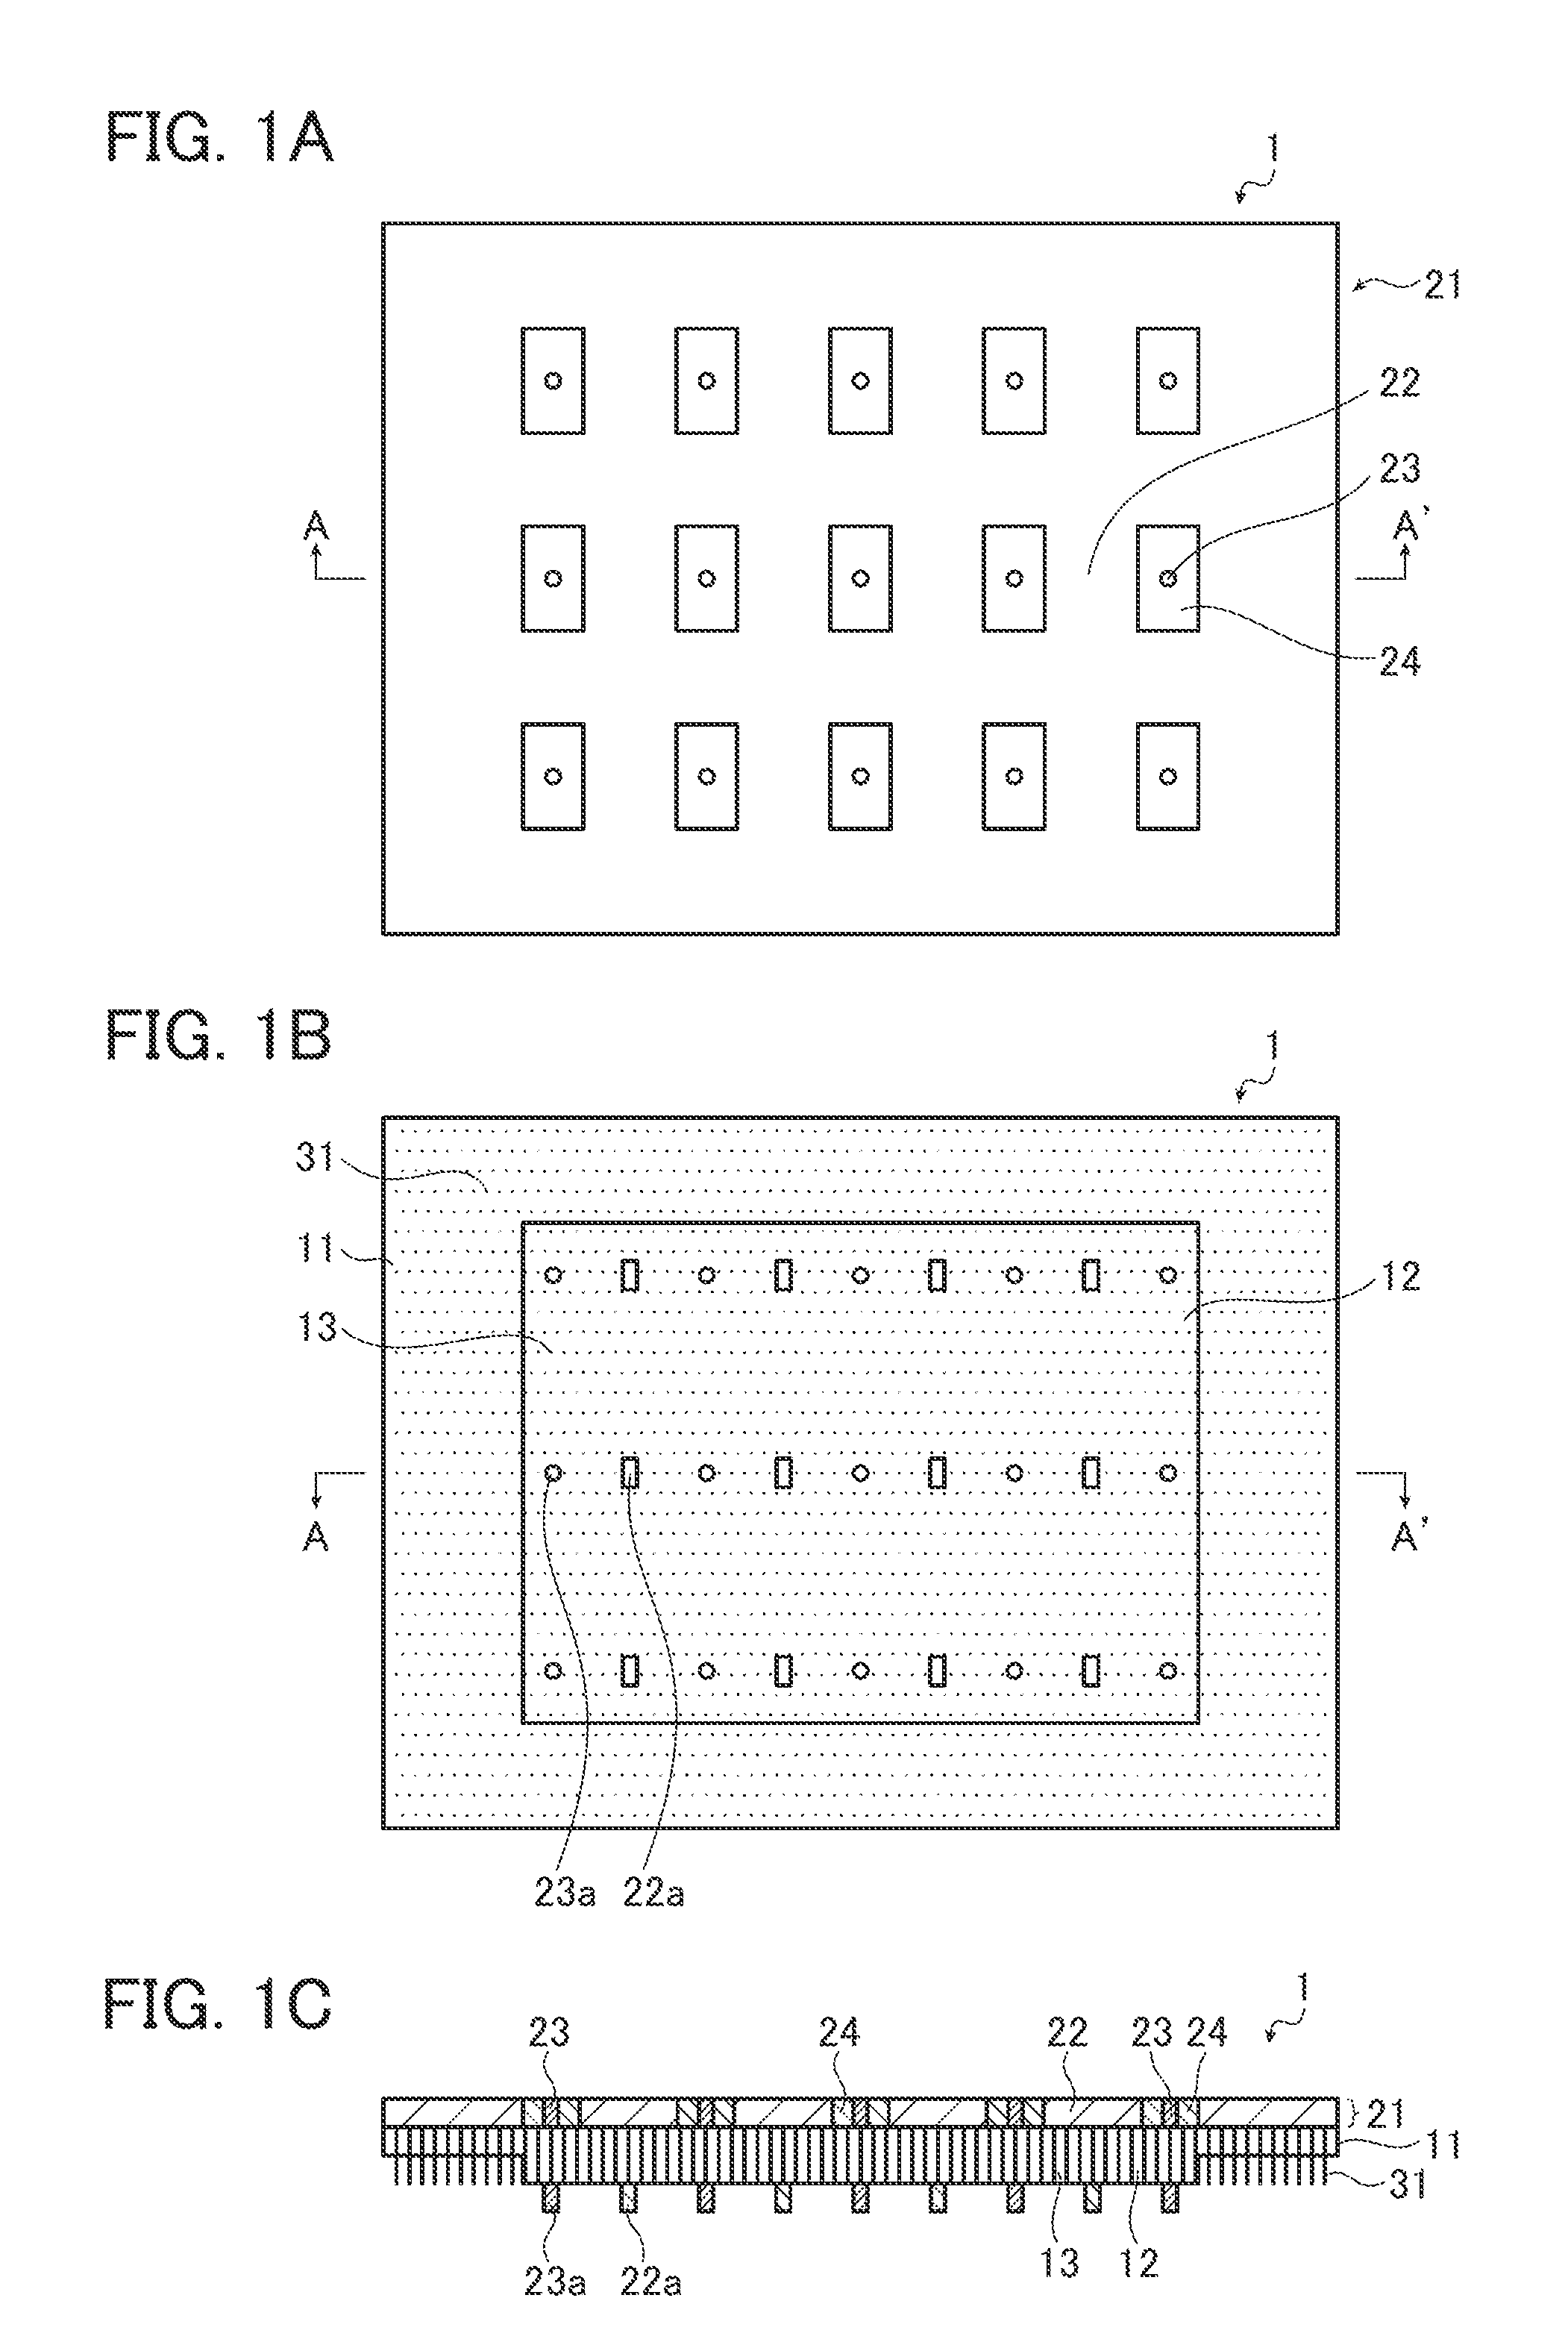 Multi-layered board and semiconductor package